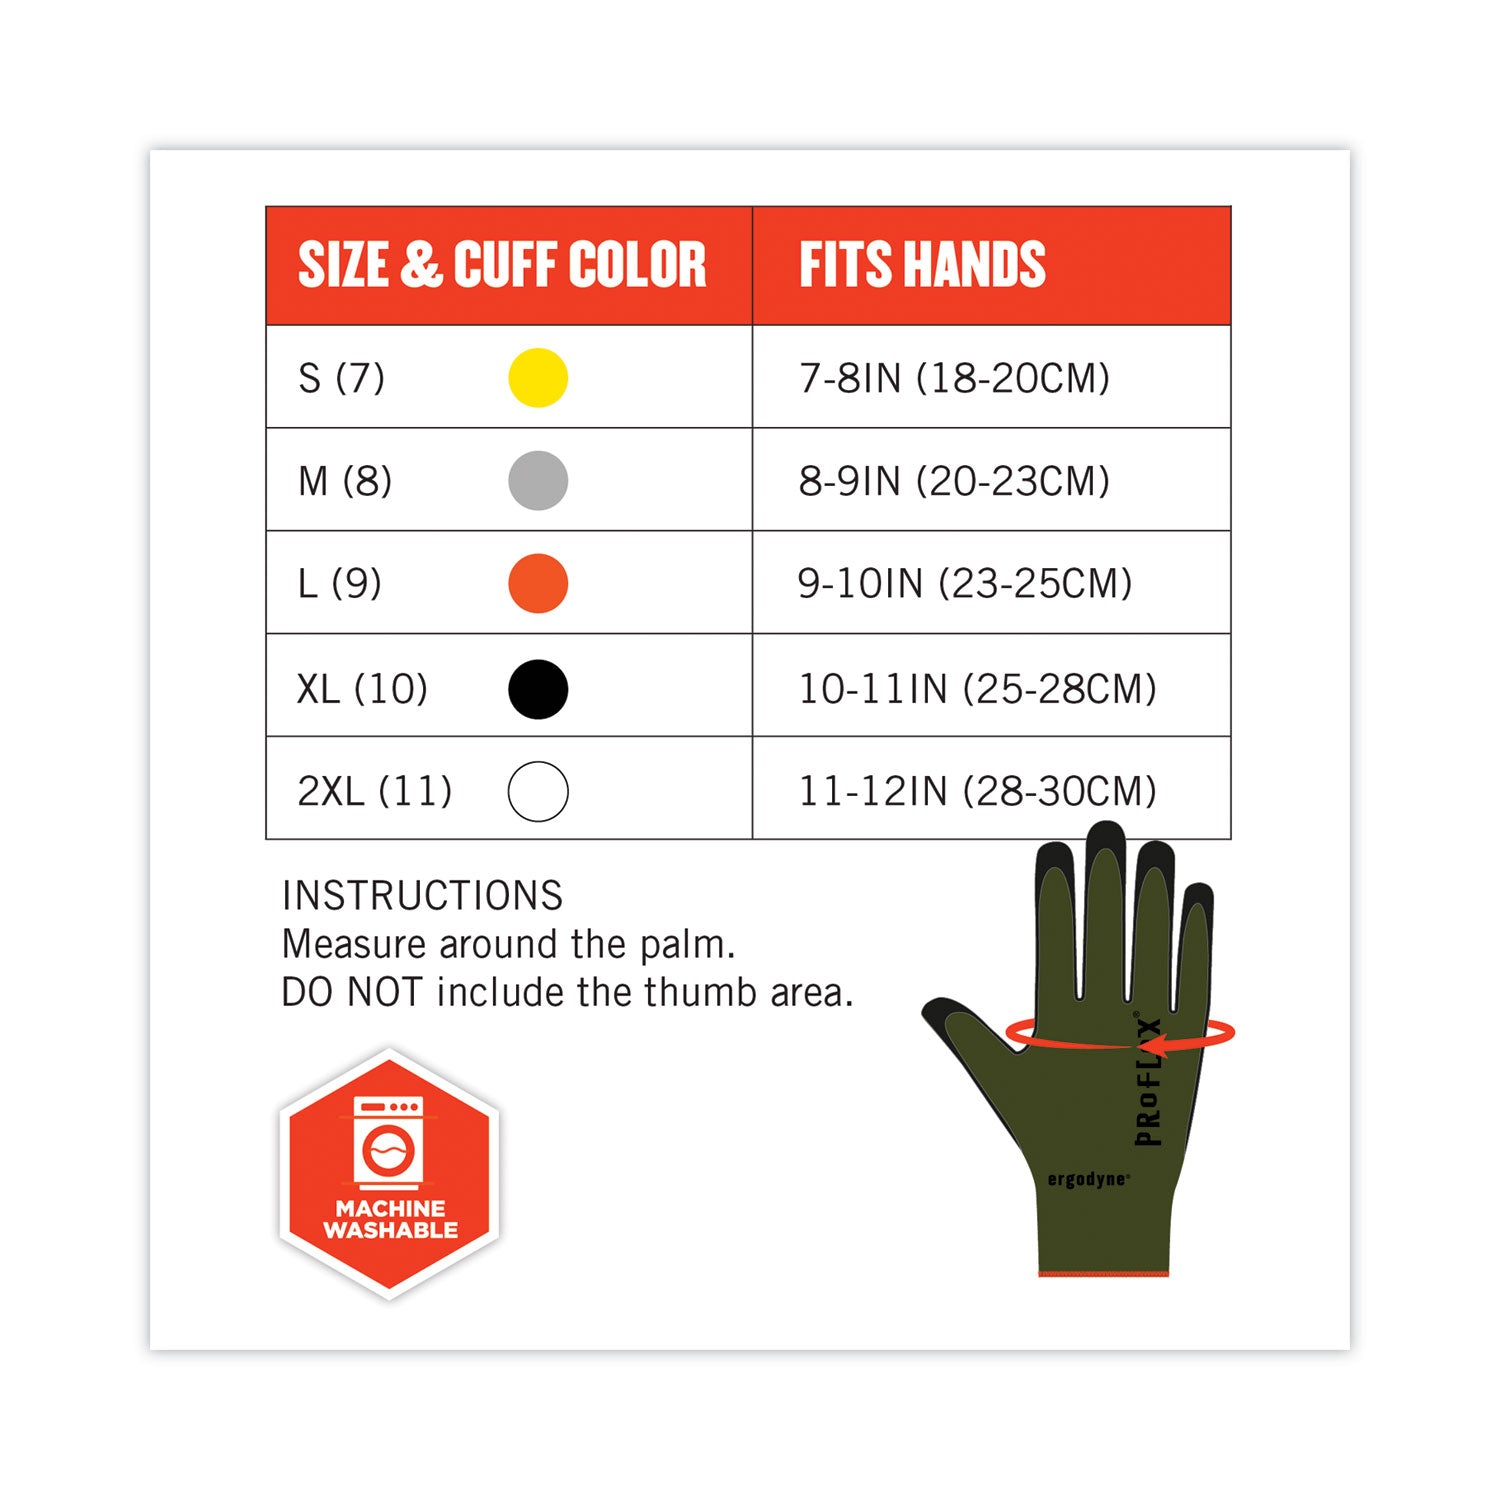 proflex-7042-ansi-a4-nitrile-coated-cr-gloves-green-small-12-pairs-pack-ships-in-1-3-business-days_ego10332 - 8